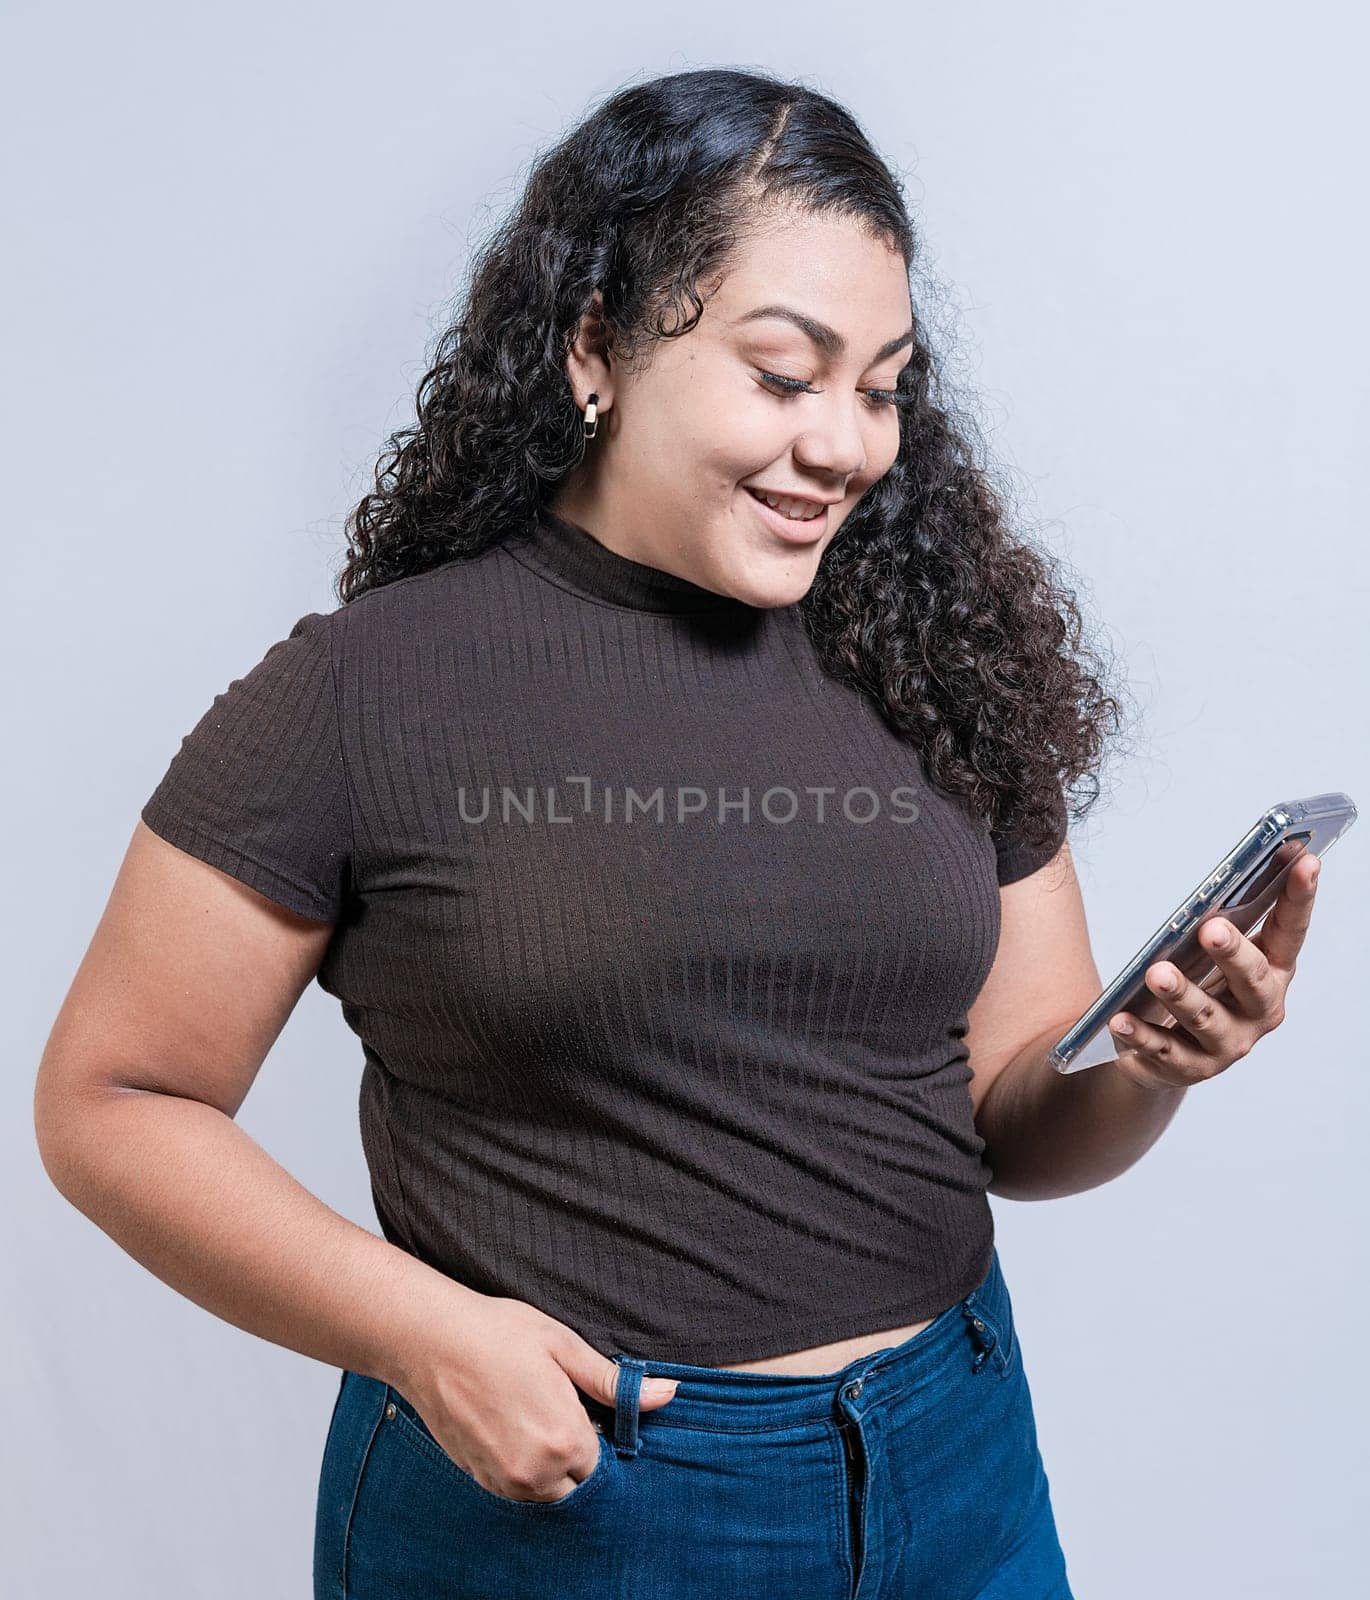 Smiling latin girl using cell phone isolated. Cheerful young woman with curly hair texting on cell phone isolated.